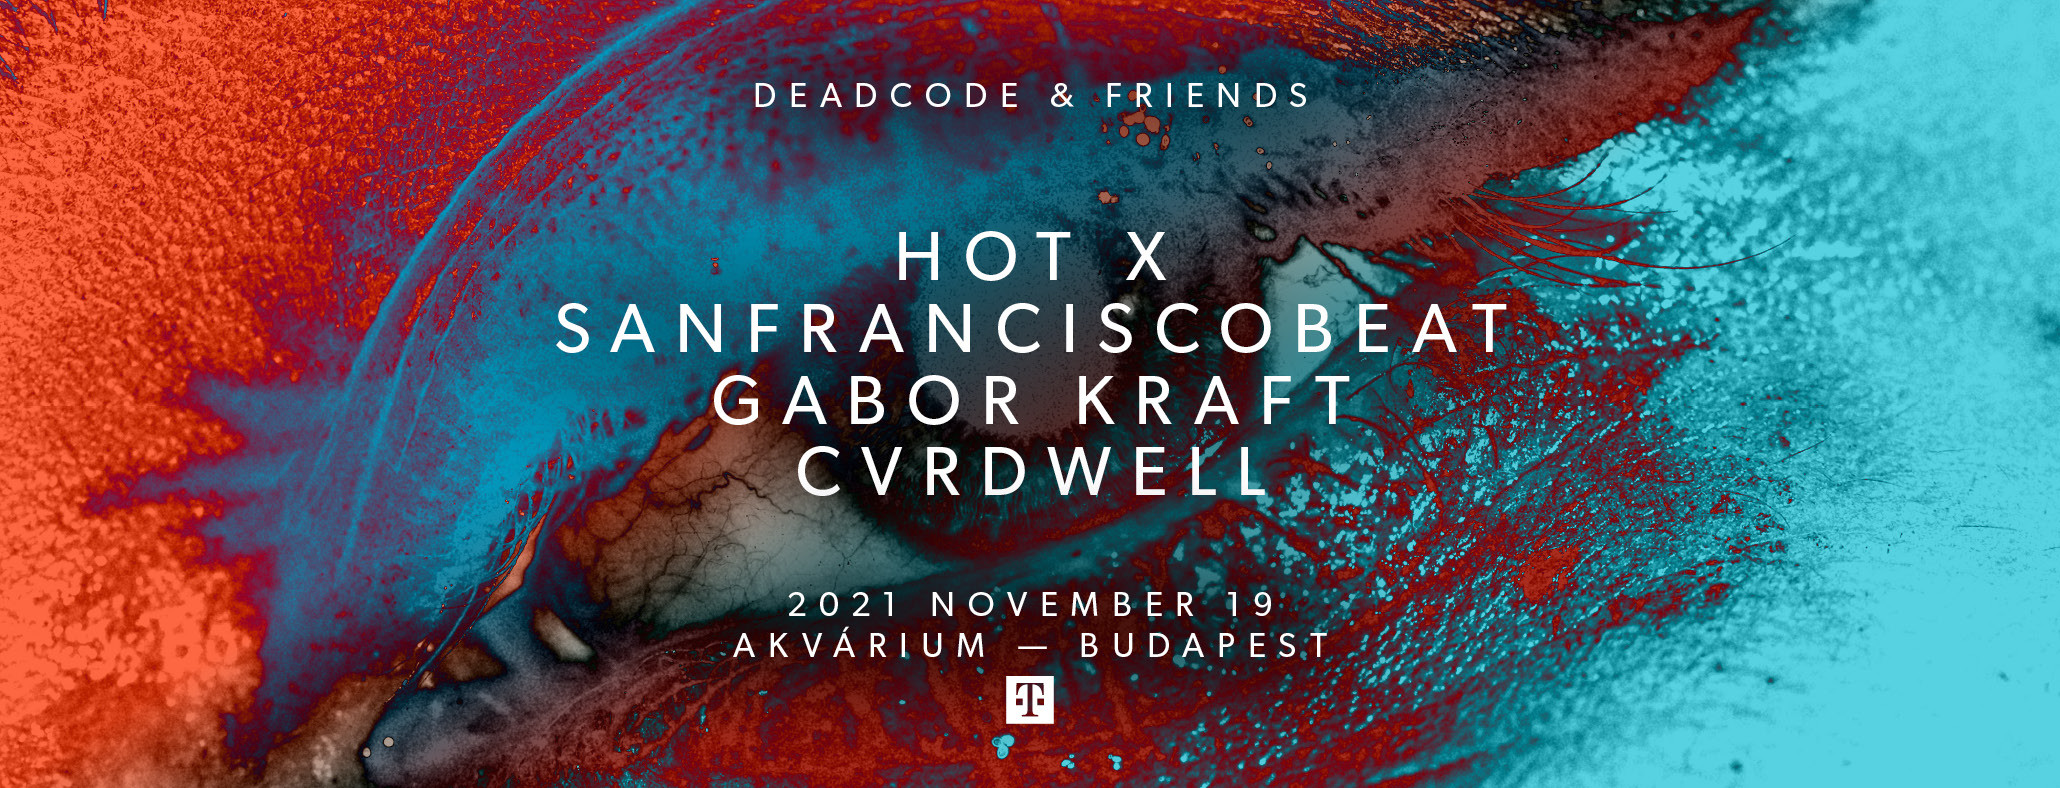 DEADCODE and FRIENDS 2021